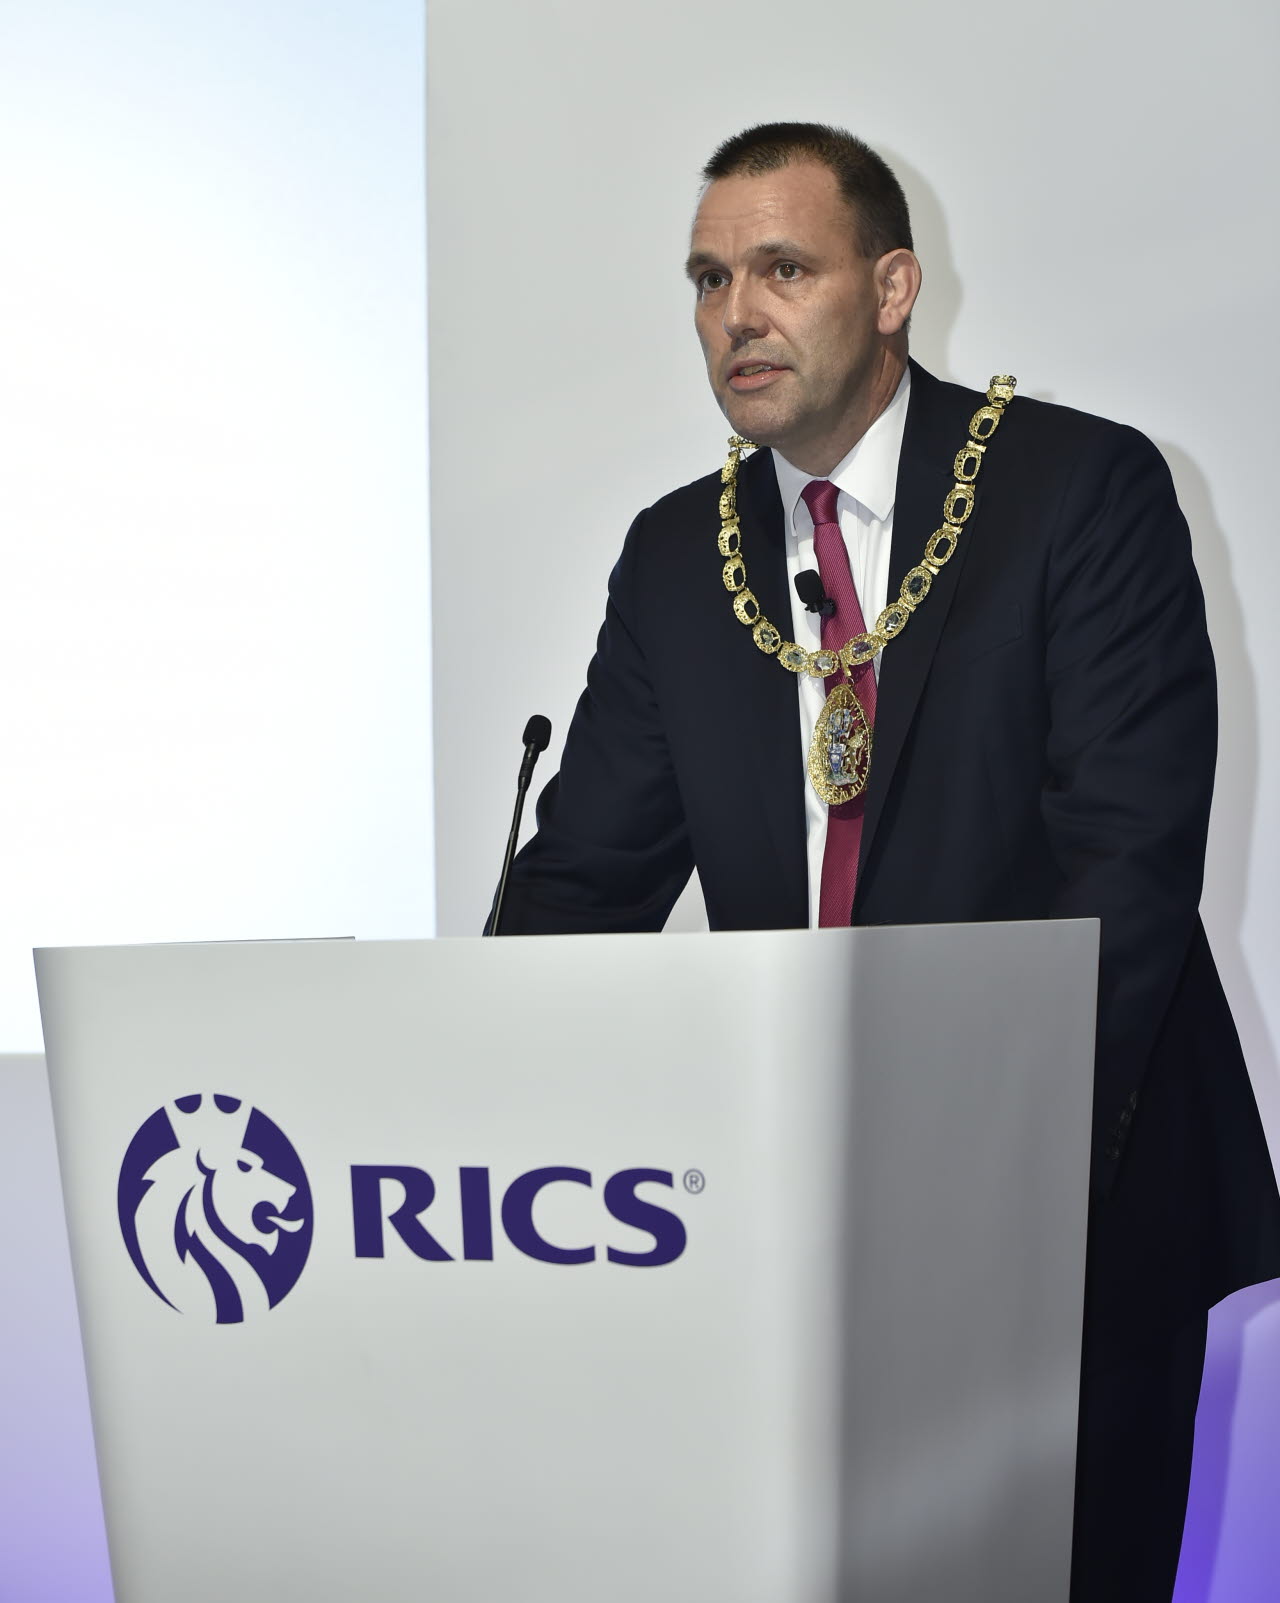 New president takes the helm at RICS